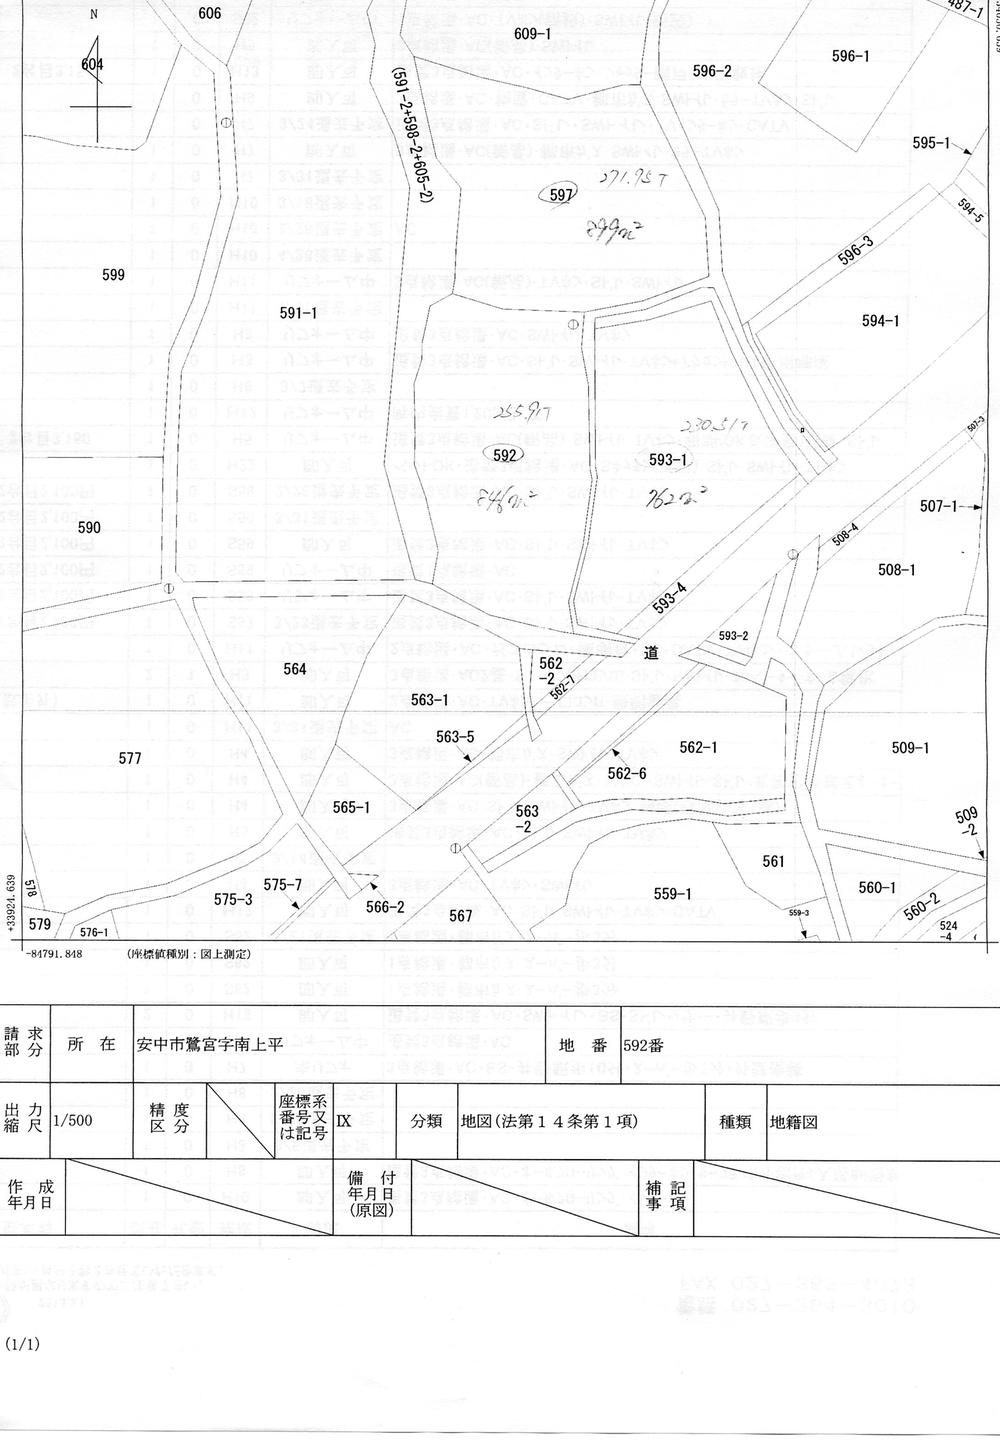 Compartment figure. Land price 26,530,000 yen, Land area 2,507 sq m site (03 May 2013) Shooting